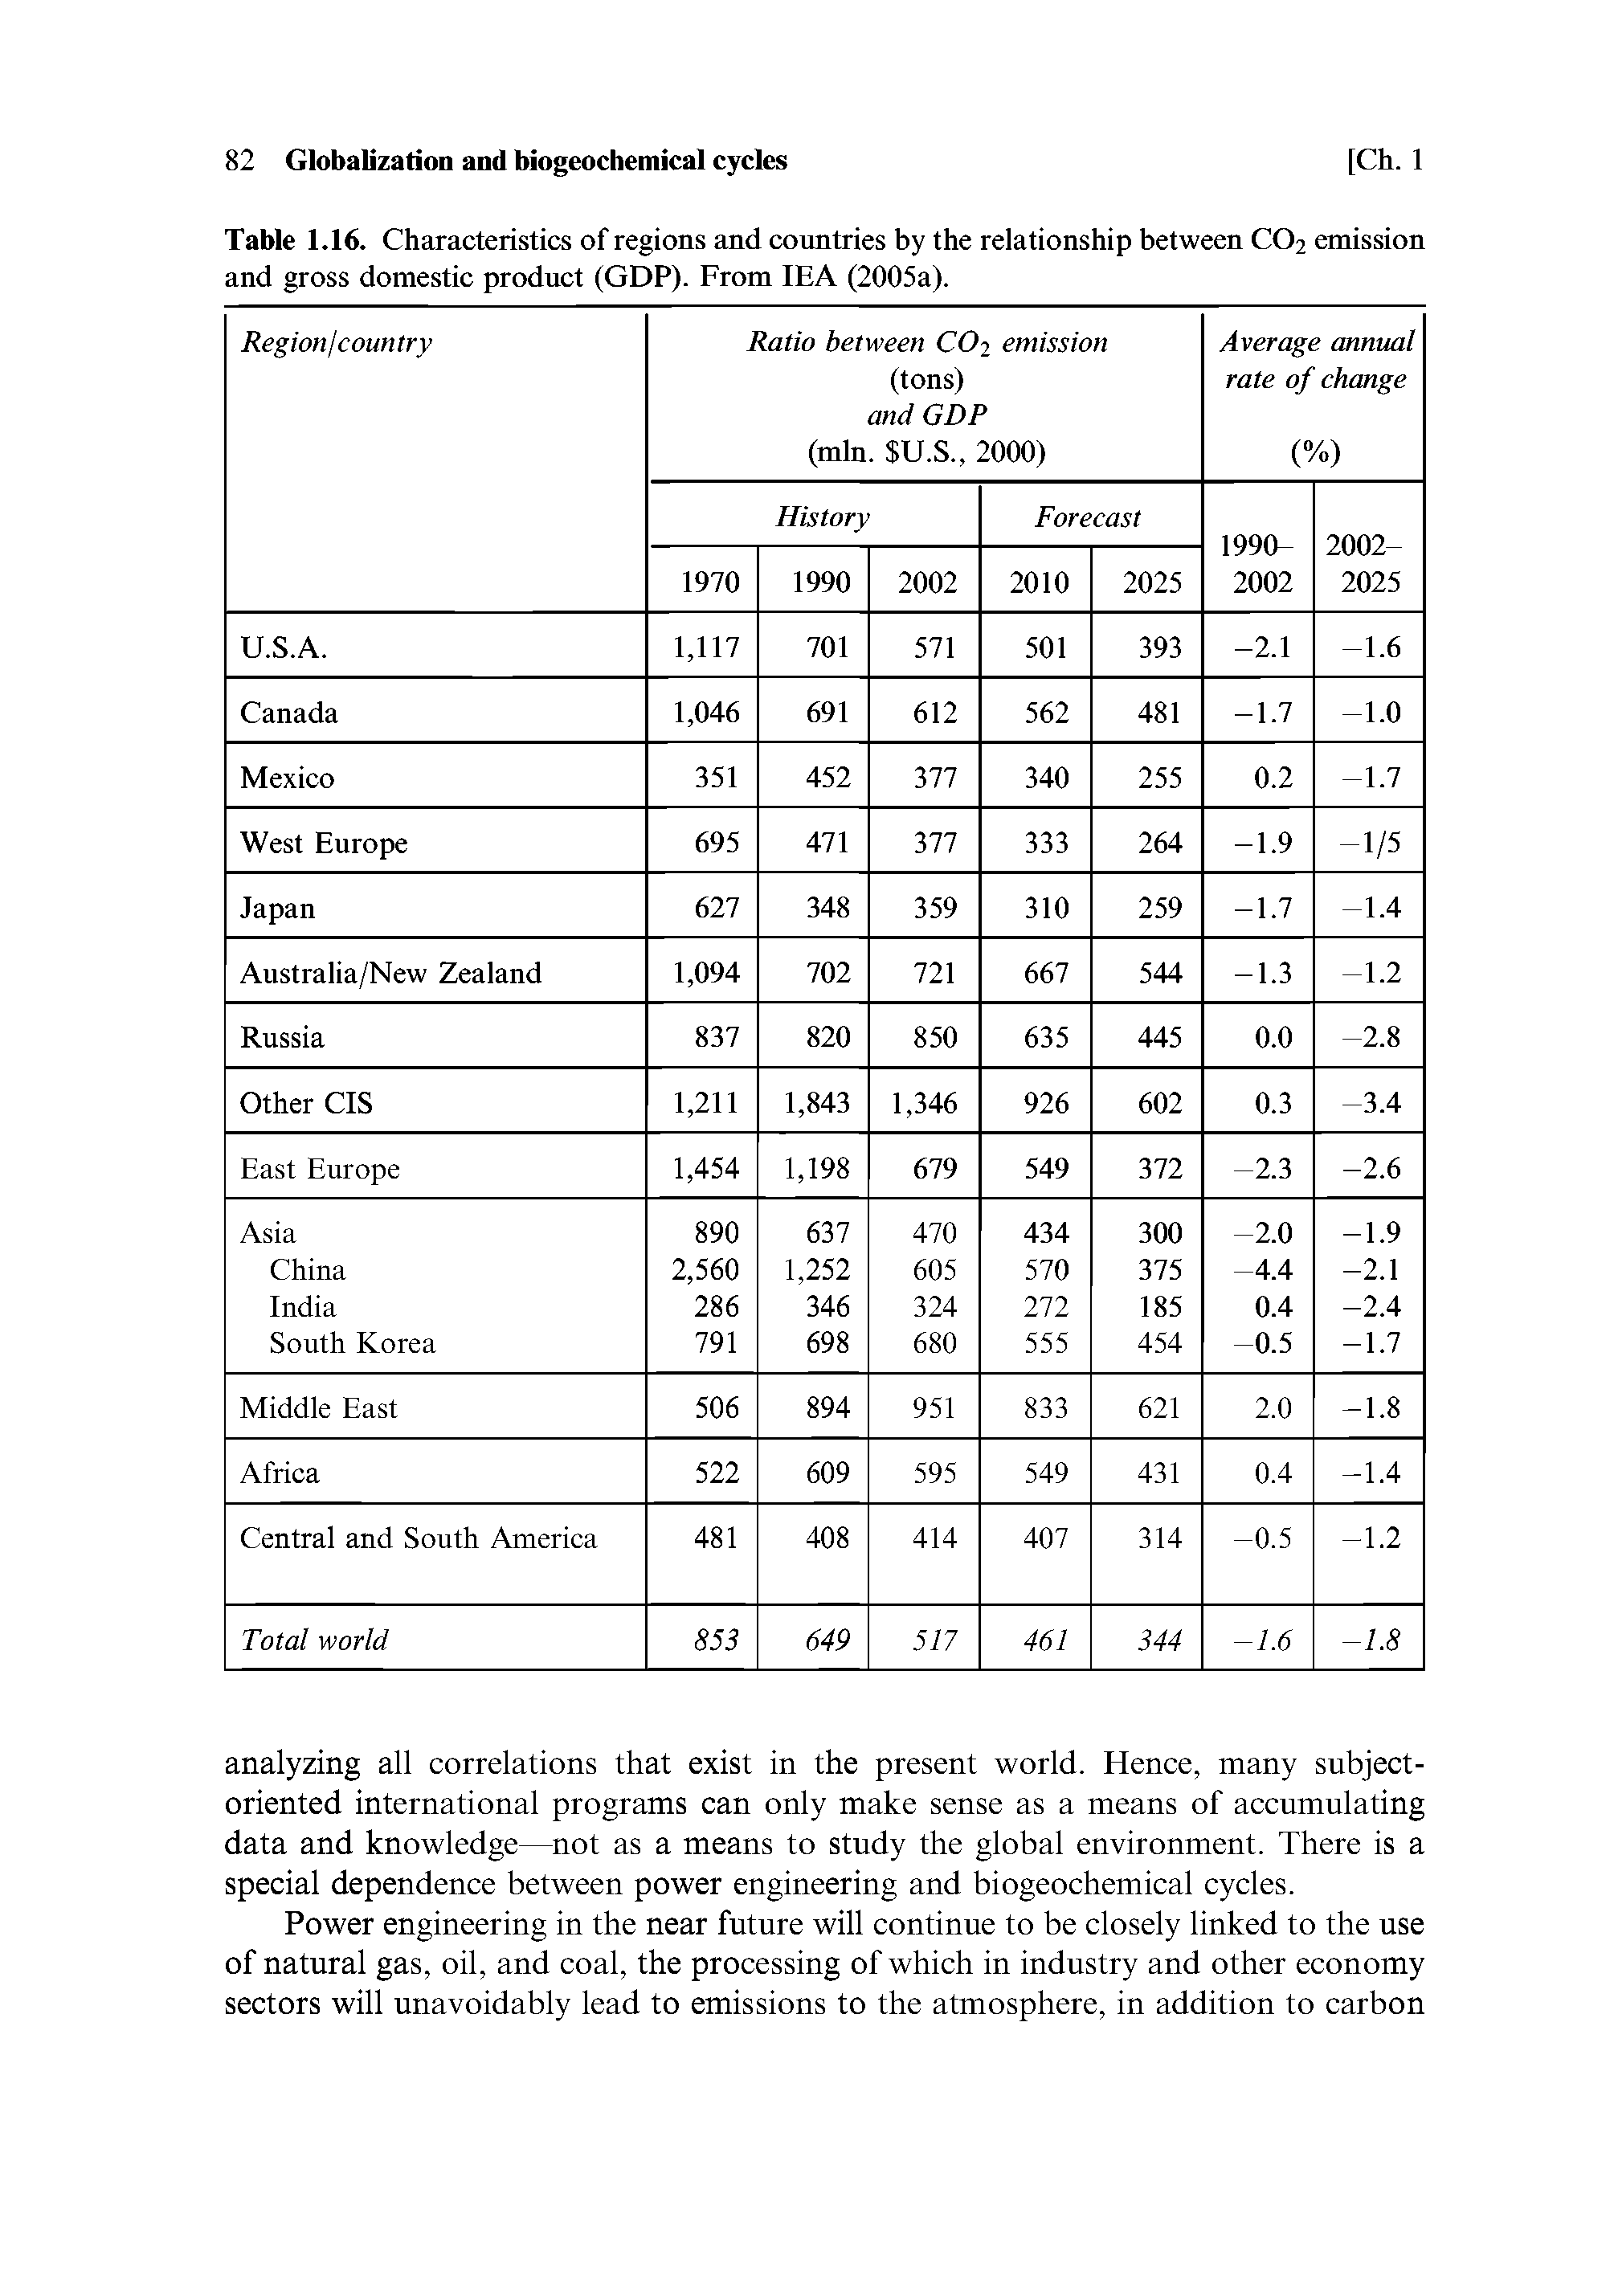 Table 1.16. Characteristics of regions and countries by the relationship between C02 emission and gross domestic product (GDP). From IEA (2005a).